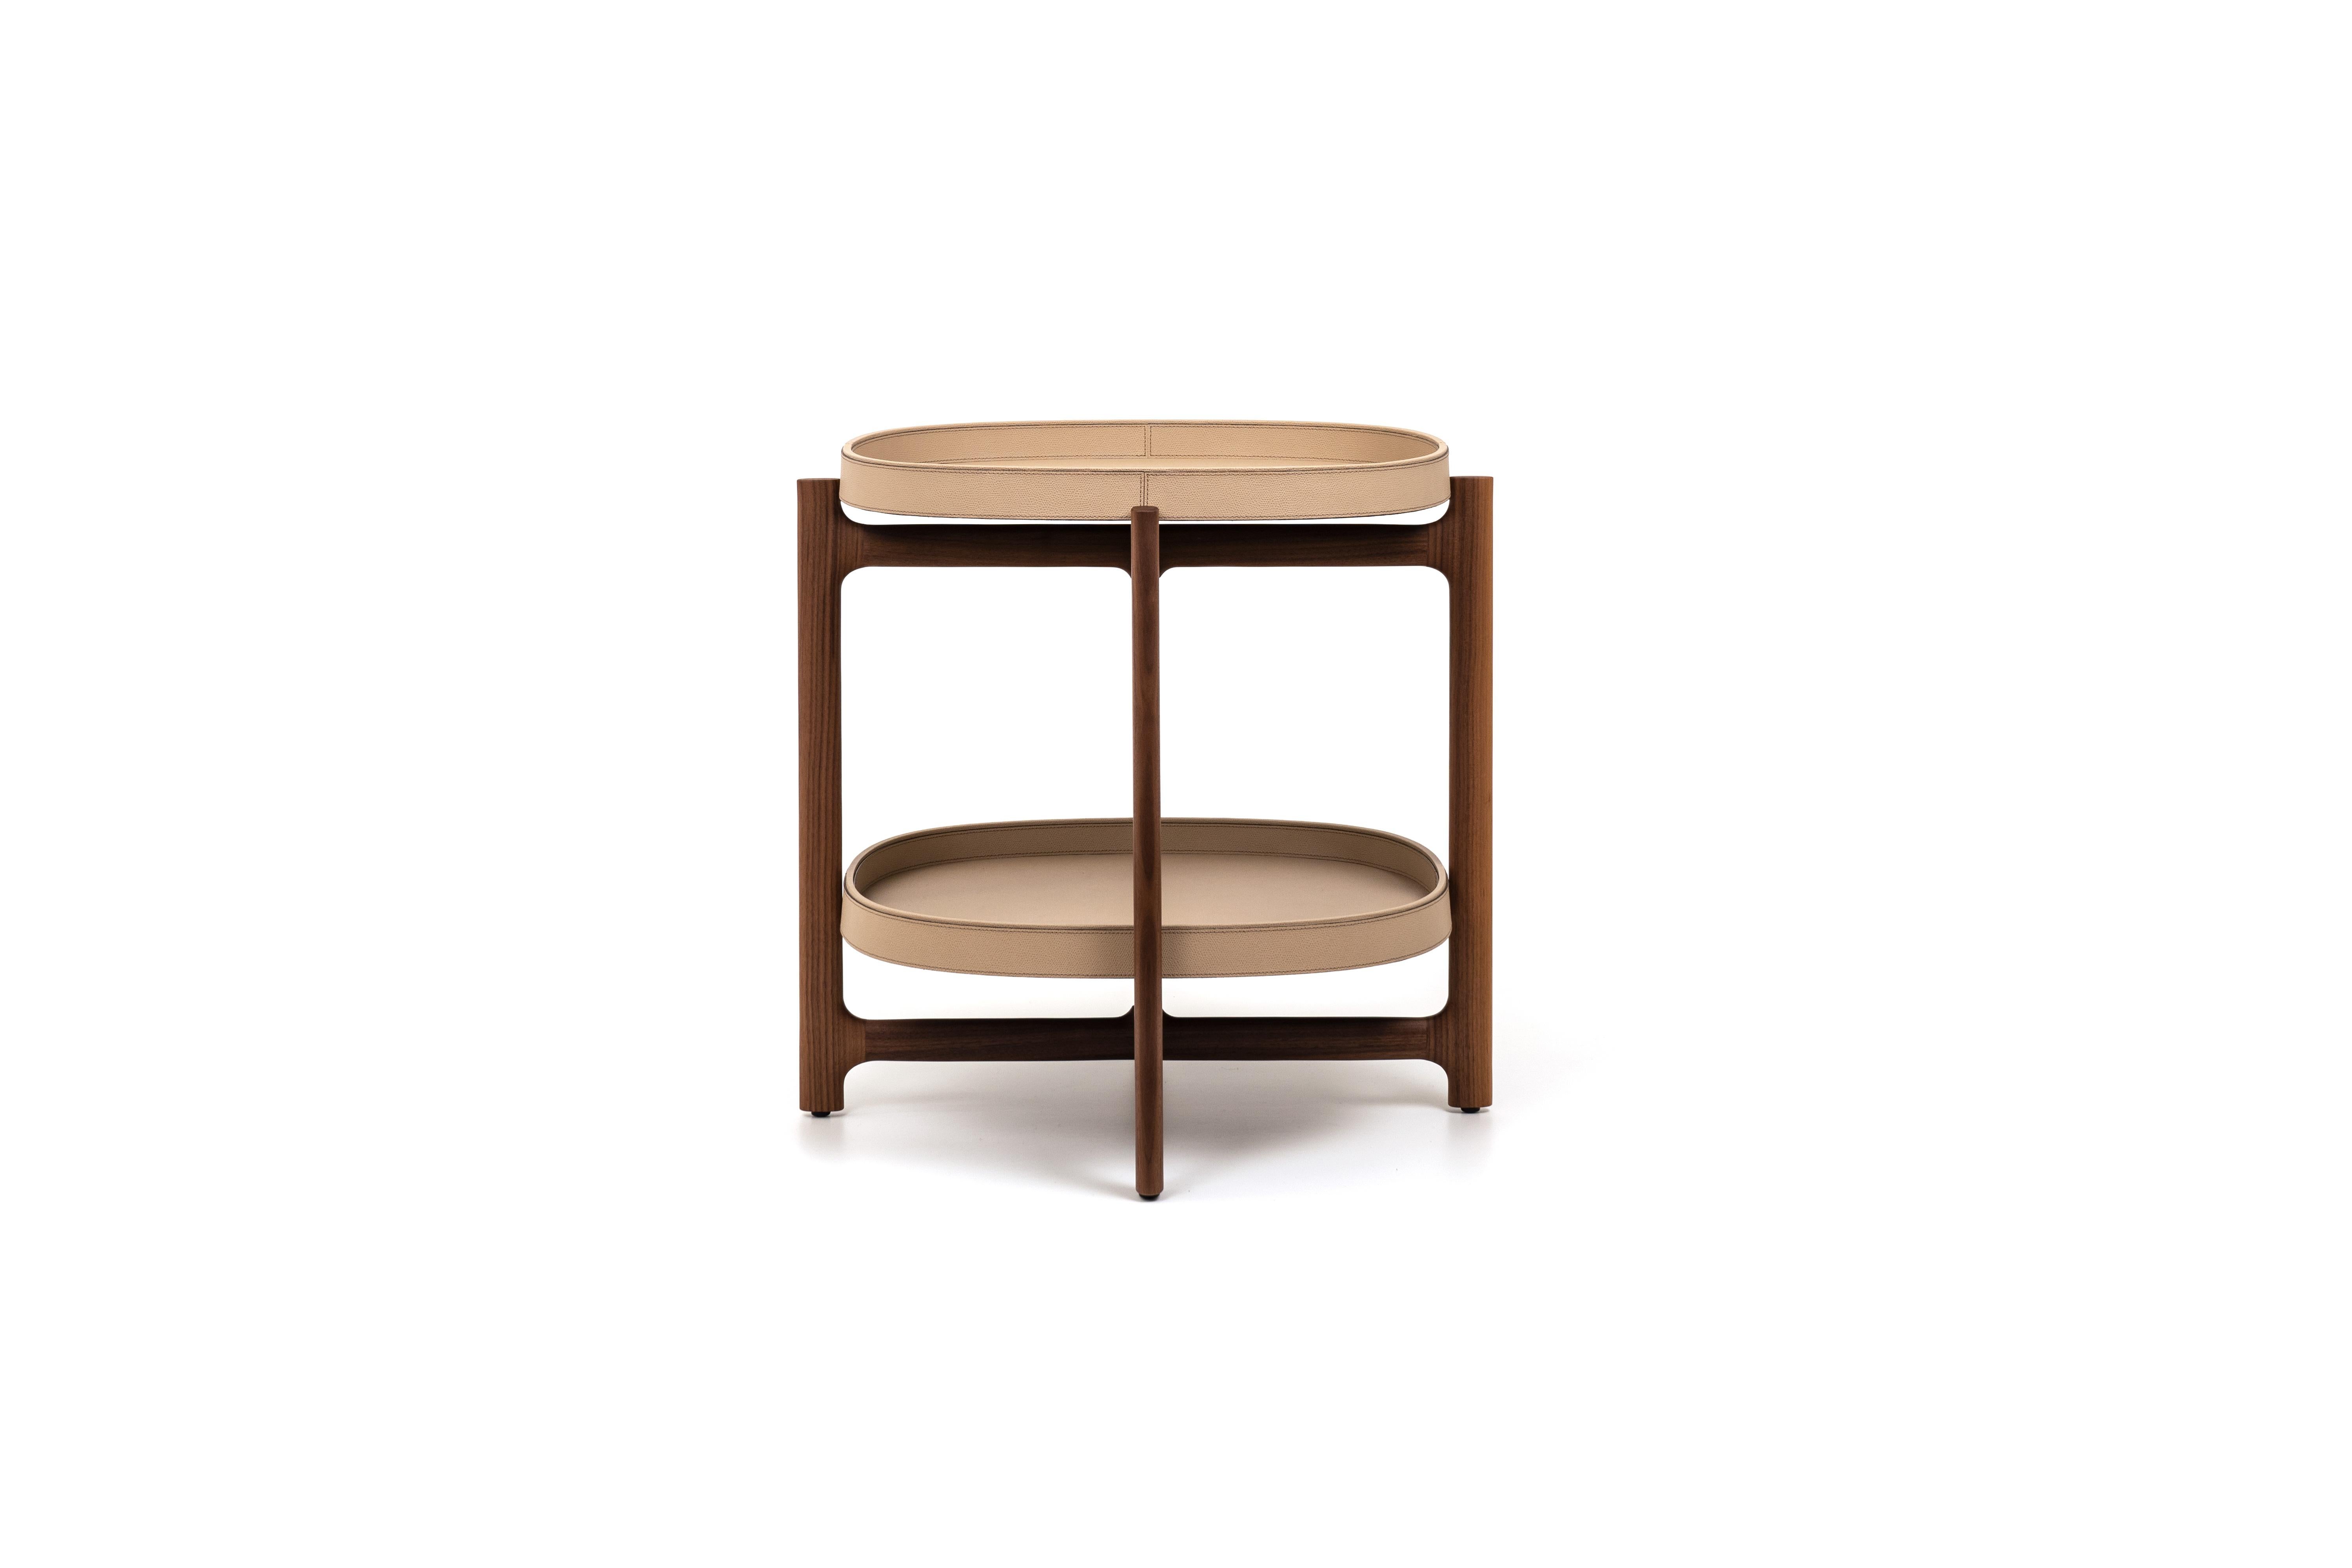 This side table line is one of Pinetti's latest collections. Chelsea folding tables are made of walnut wood and carry 2 removable trays, in exquisite Italian leather. 

Due to its removable trays, which can also be used as serving trays, as well